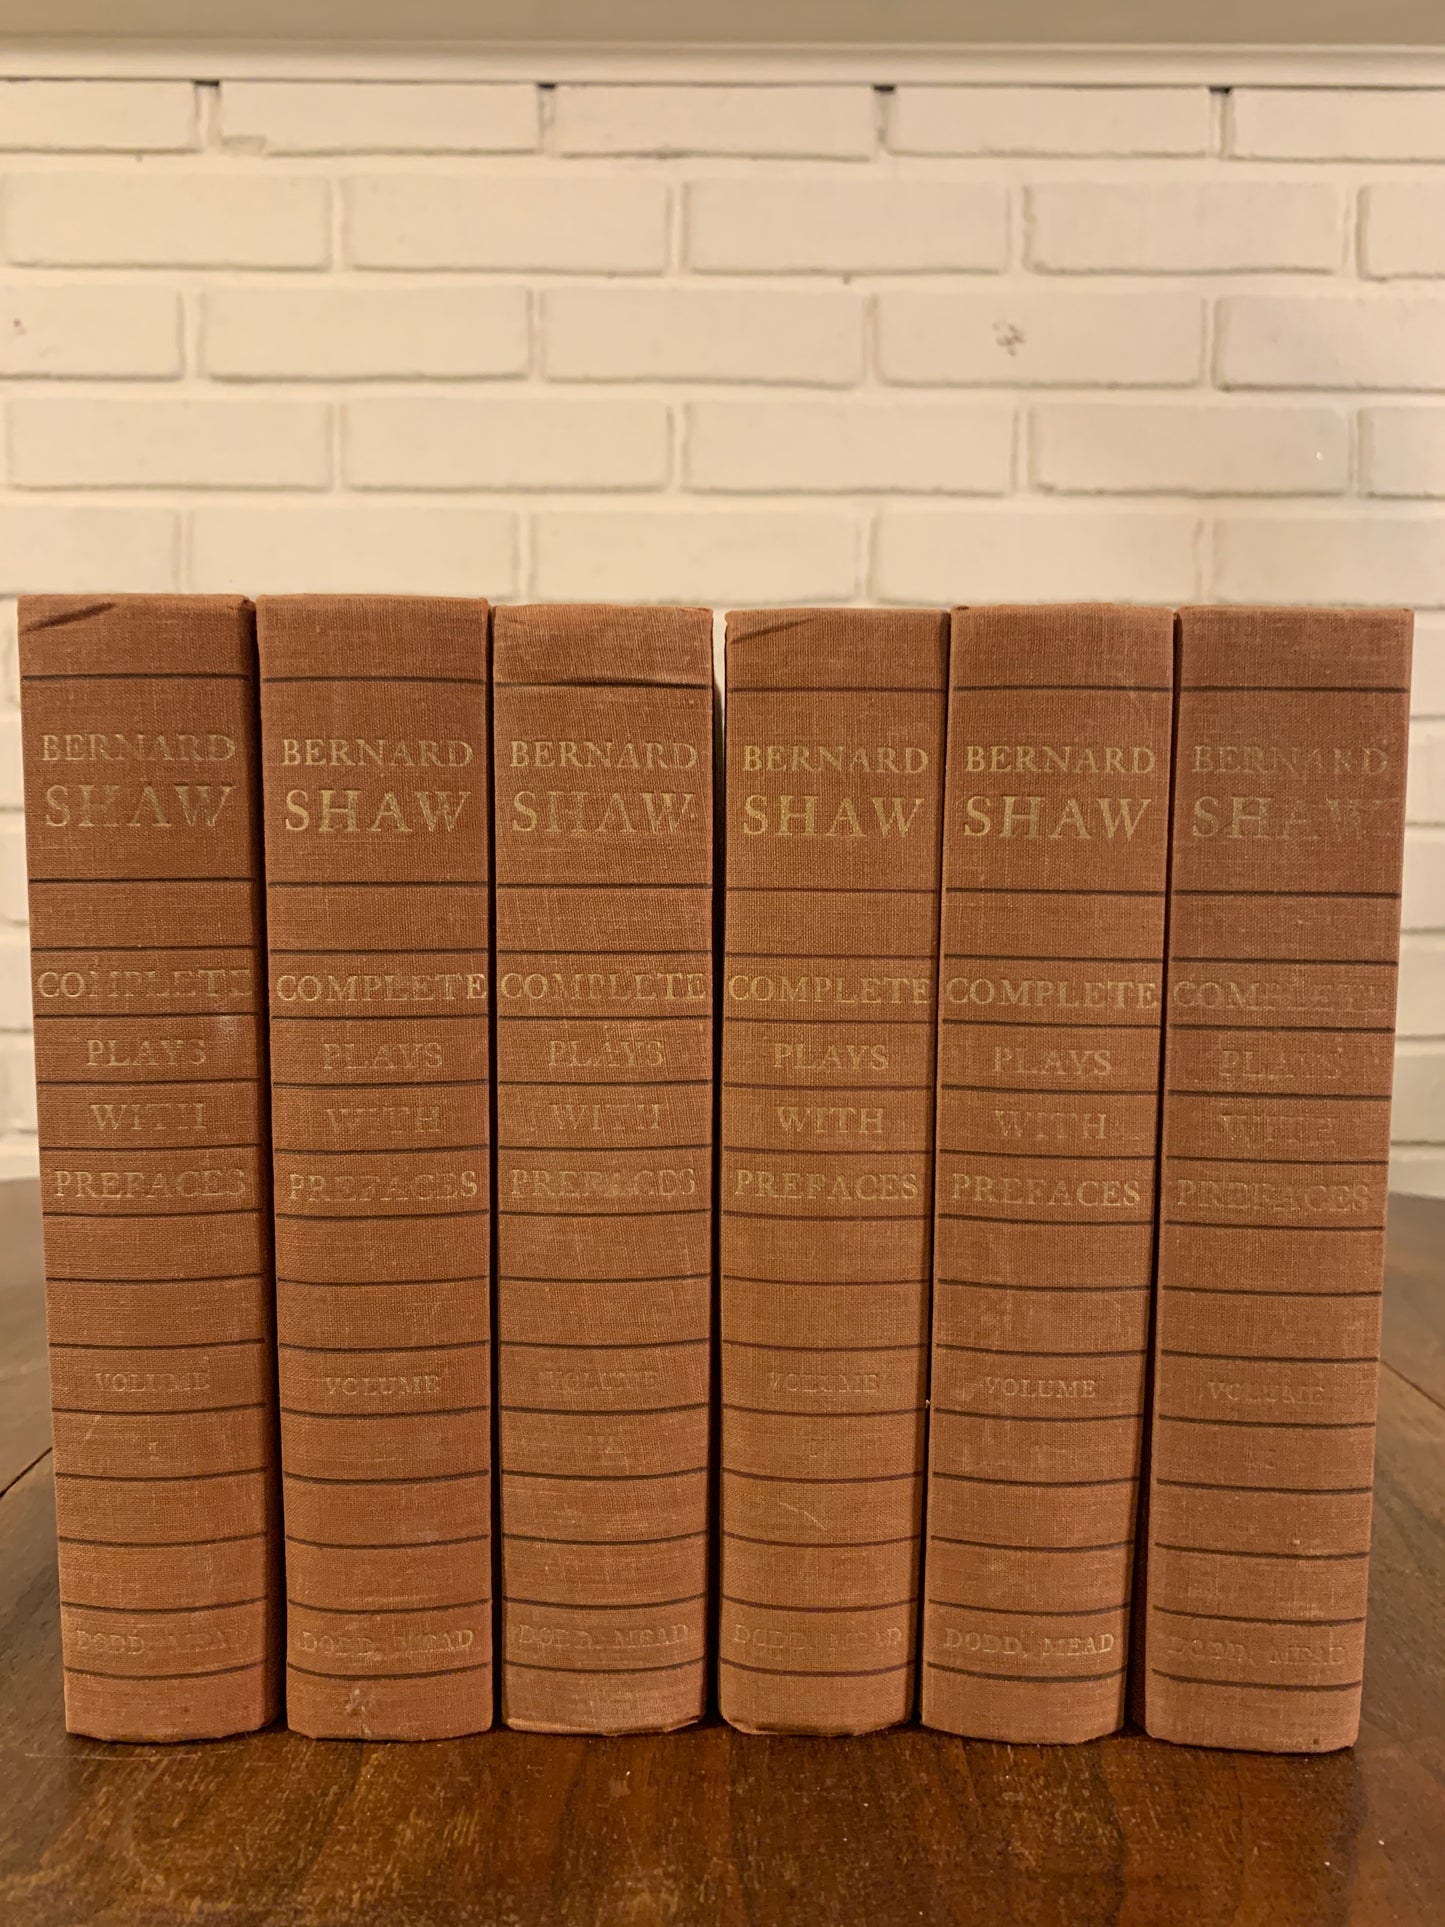 Set of (6) Volumes Bernard Shaw Complete Plays With Prefaces 1963